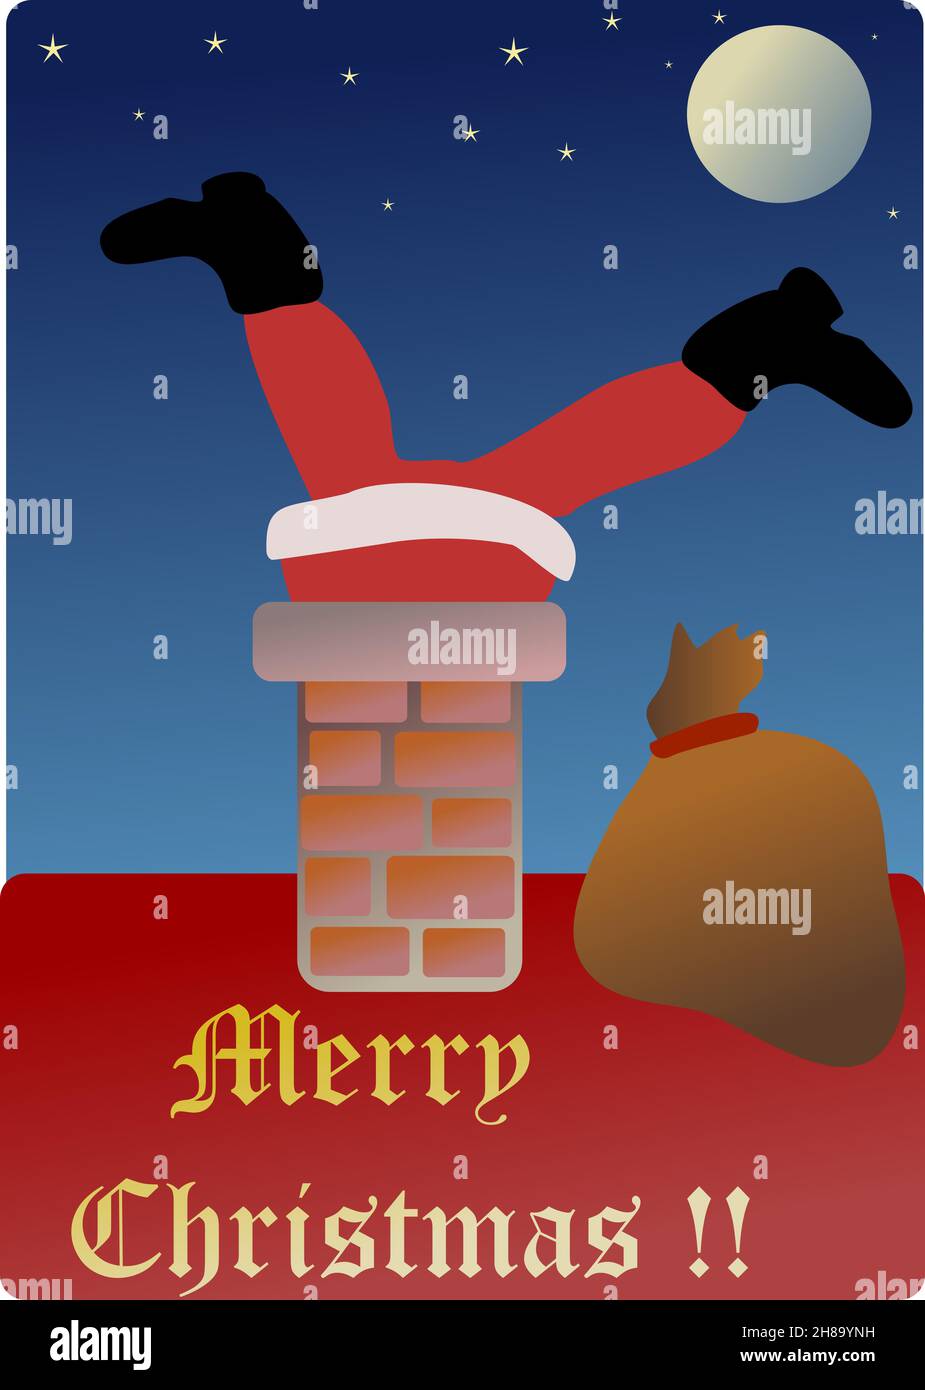 Santa Claus falling in the chimney Stock Photo